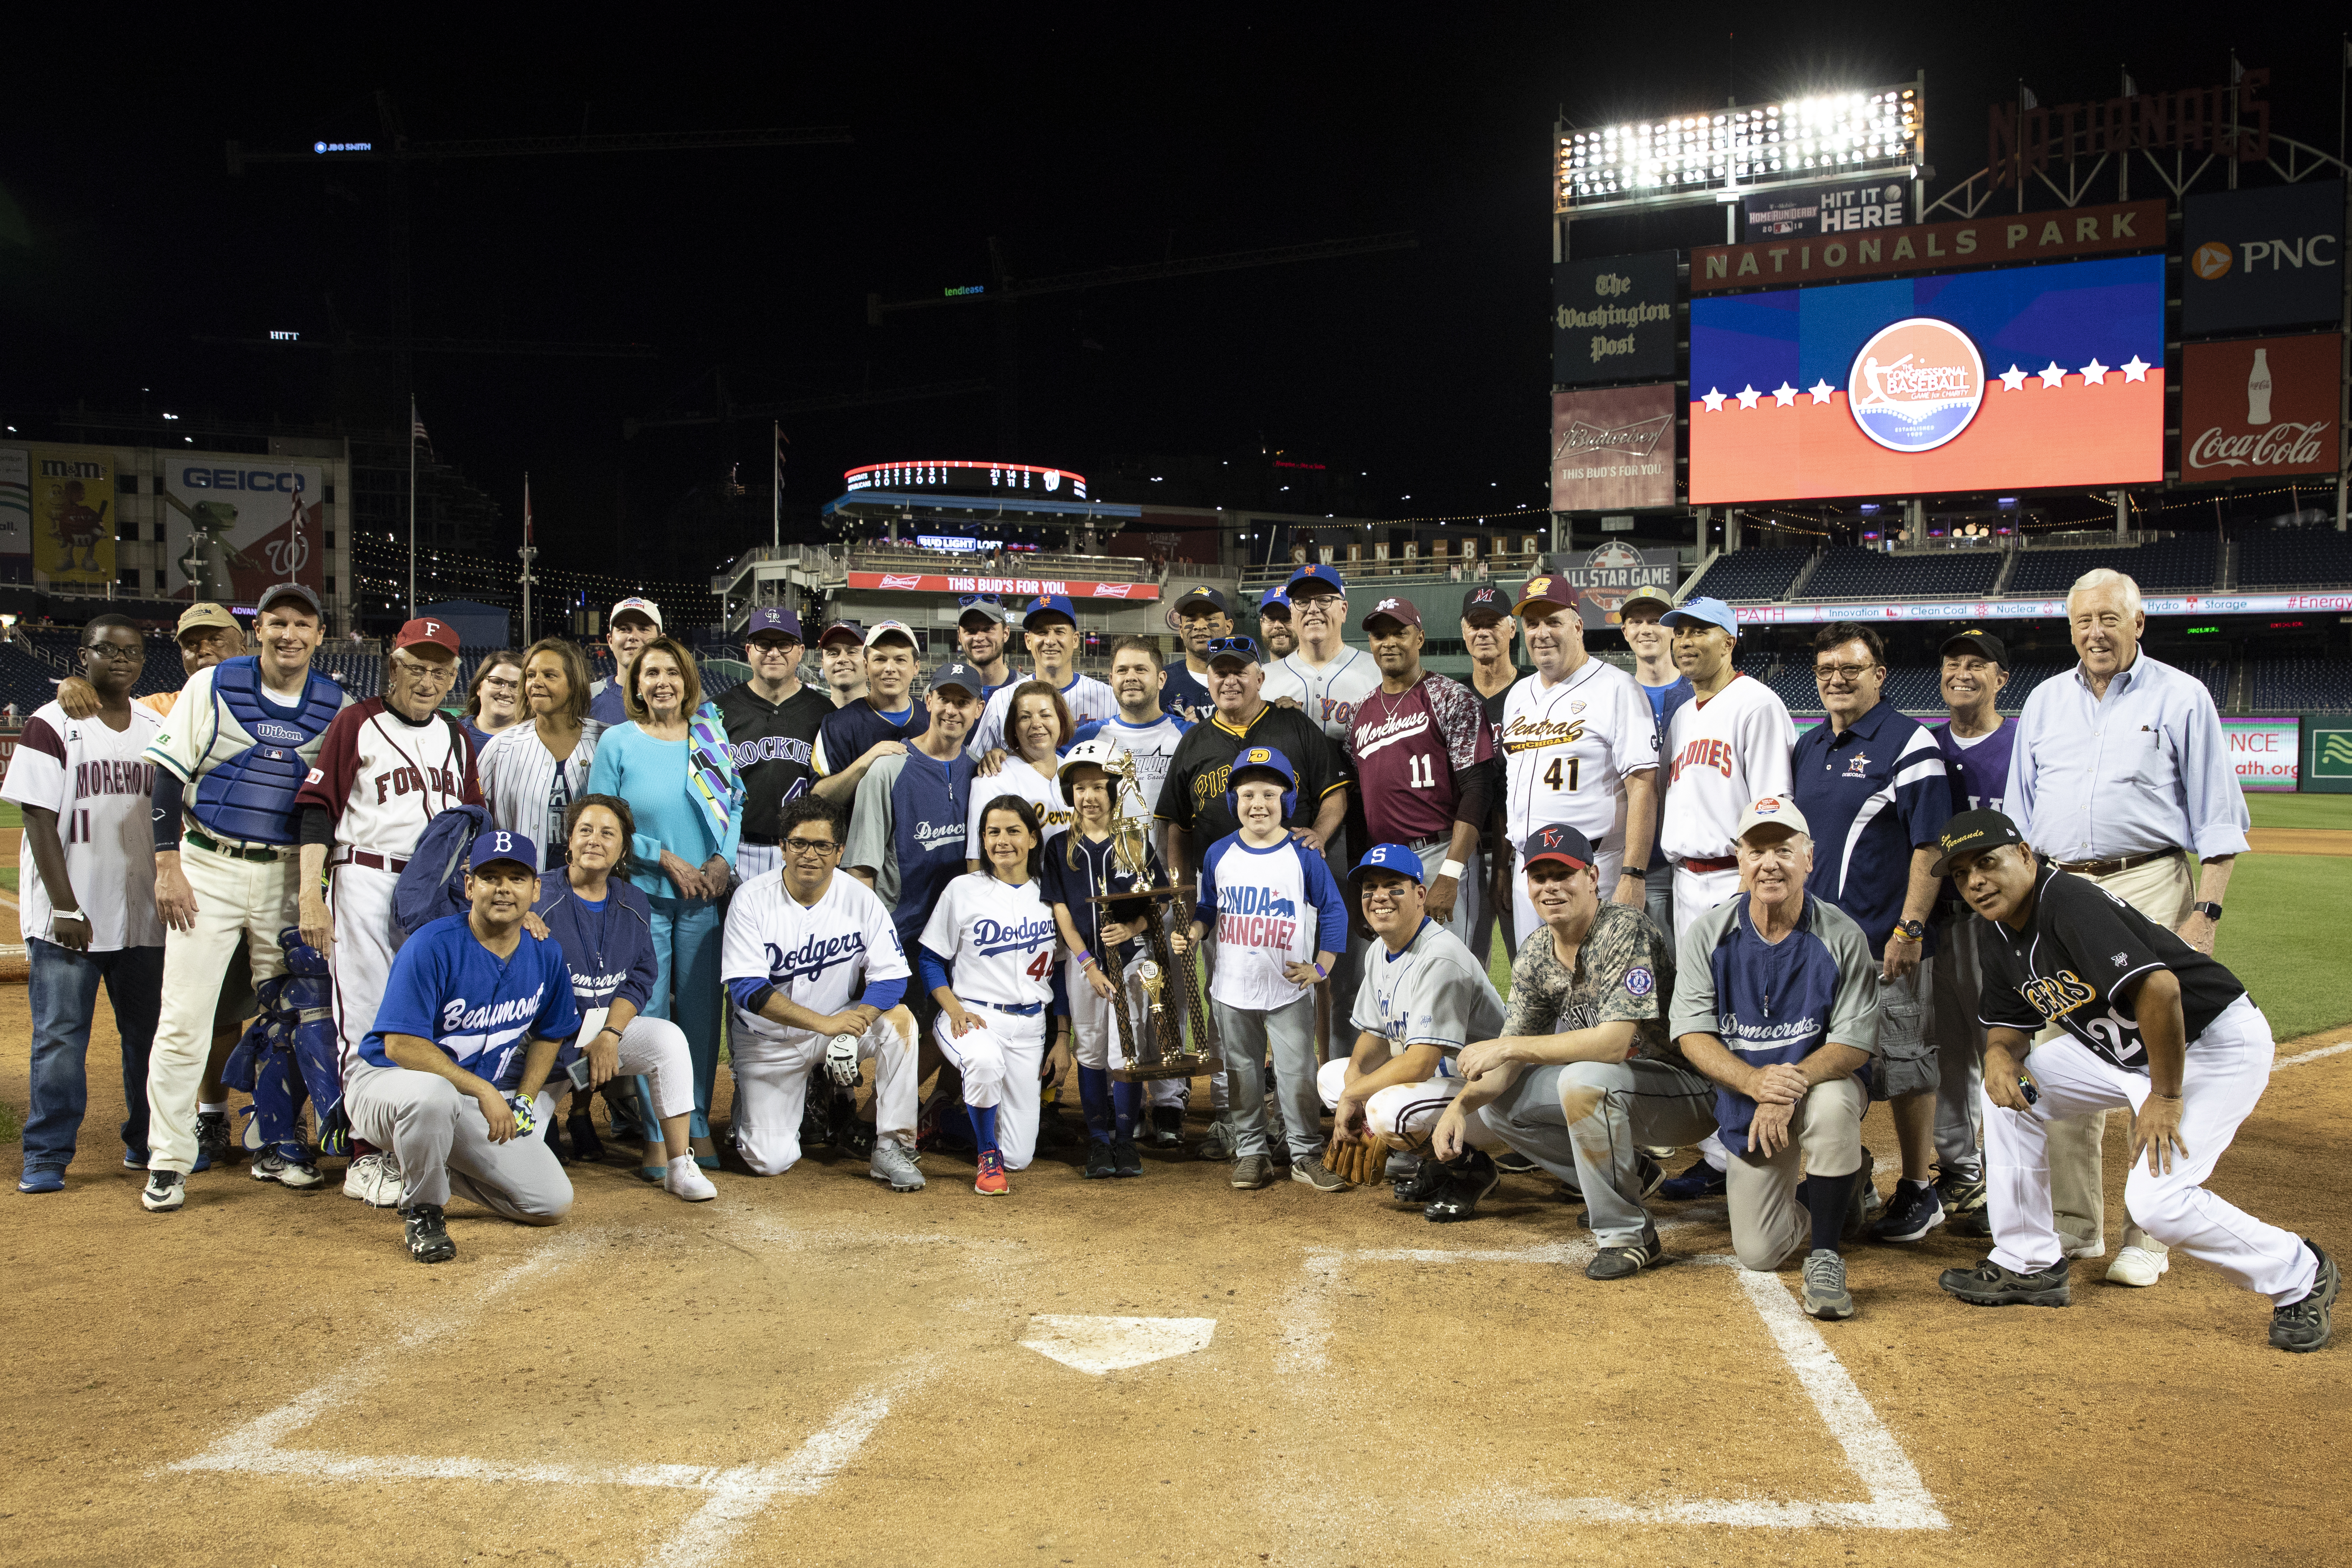 The Democrats pose with the Roll Call Trophy after beating the Republicans 21-5 in the Congressional Baseball Game on June 14, 2018 in Washington, DC. This is the 57th annual game between the Republicans and Democrats. (Photo by Alex Edelman/Getty Images)